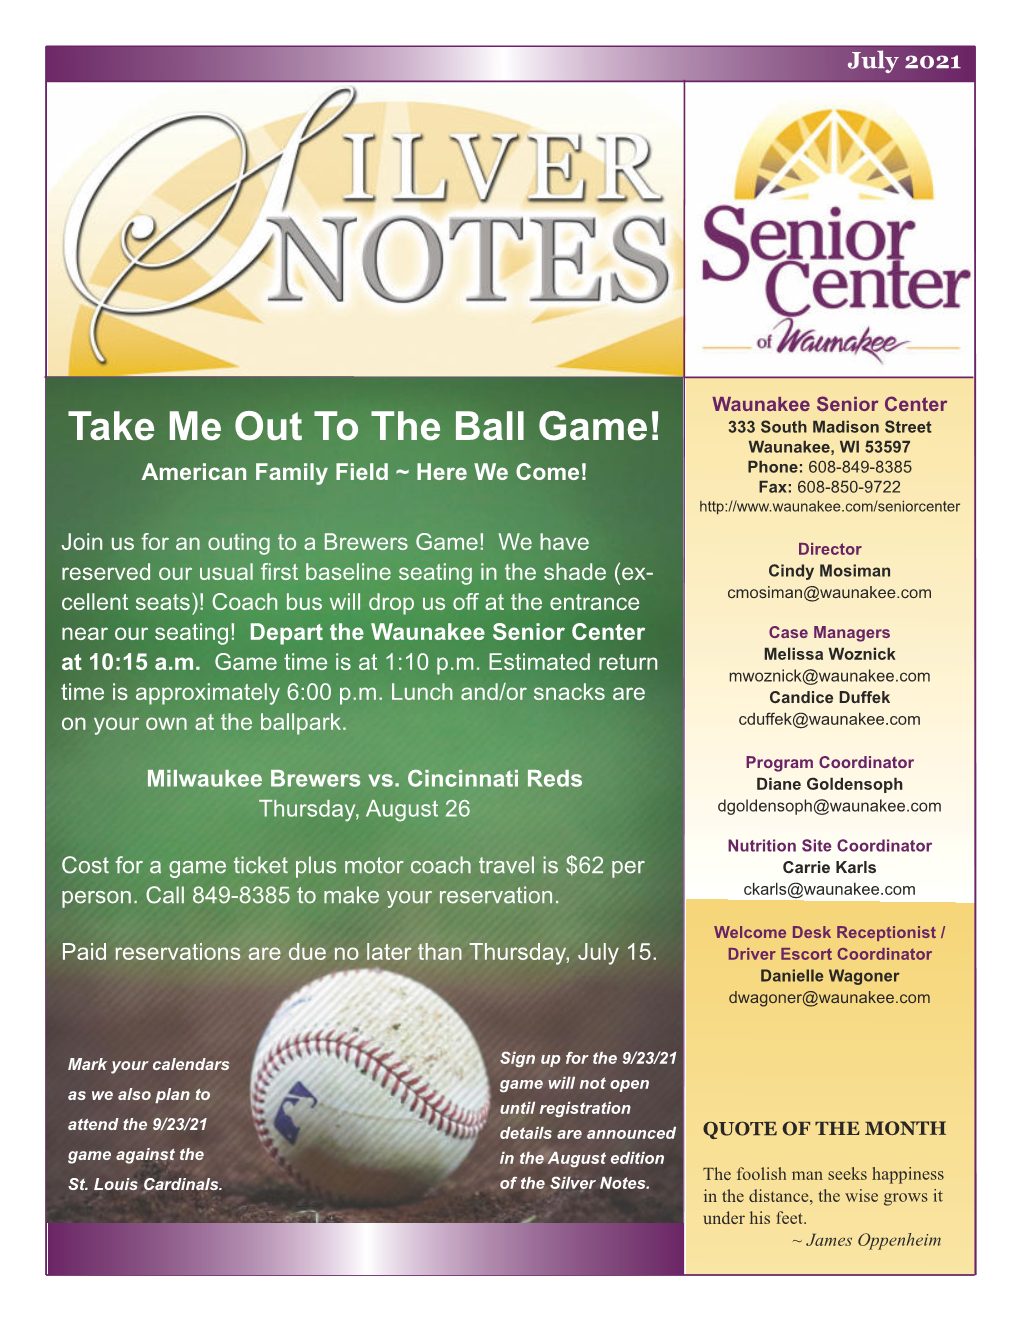 Take Me out to the Ball Game! Waunakee, WI 53597 American Family Field ~ Here We Come! Phone: 608-849-8385 Fax: 608-850-9722